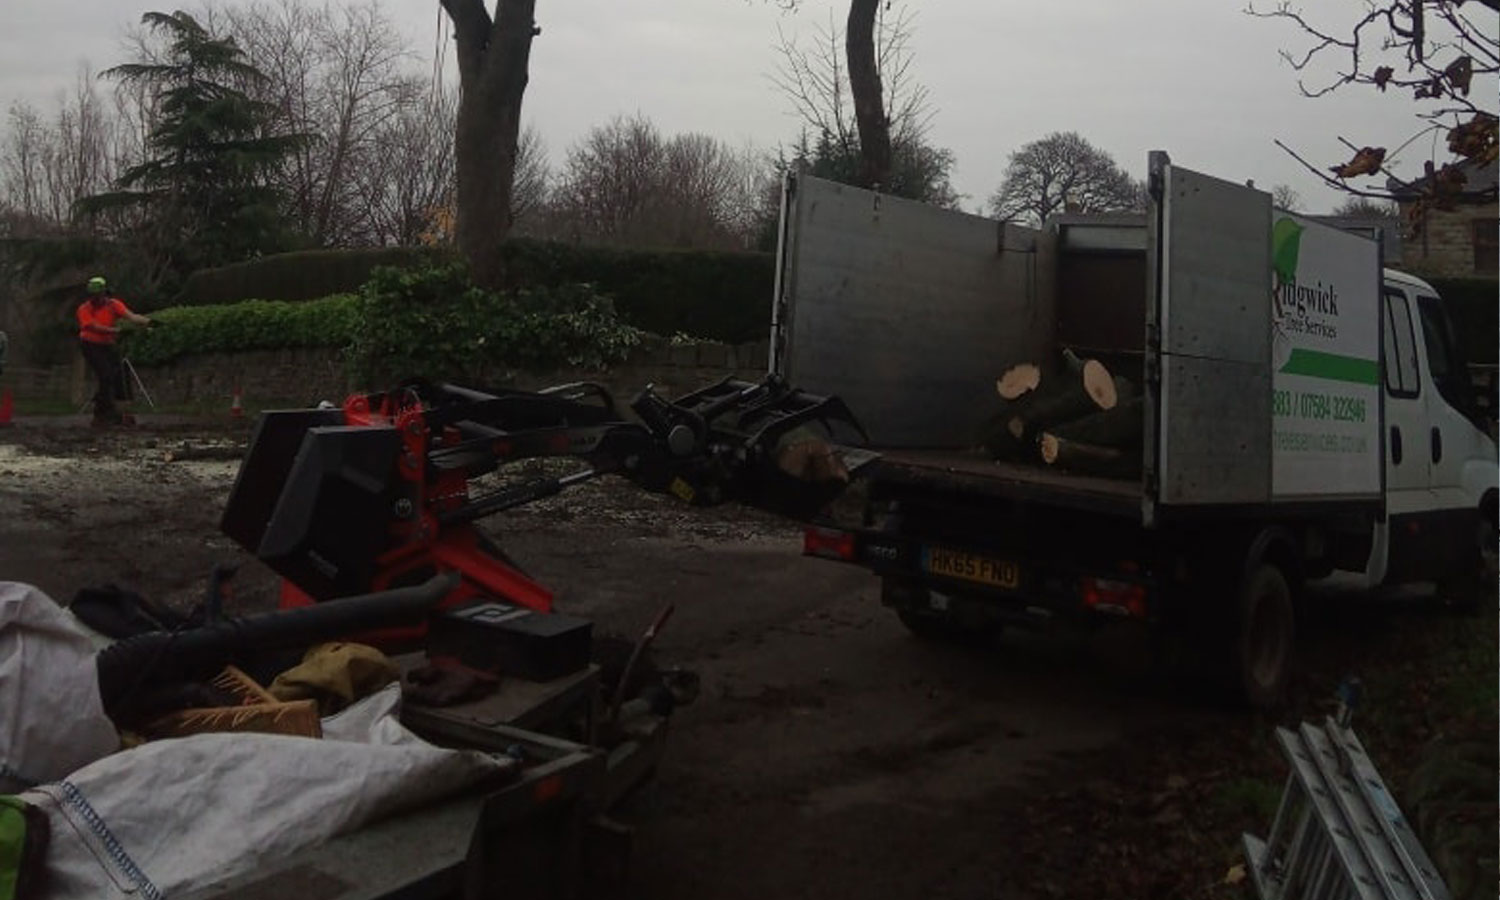 Contact Ridgwick Tree Services